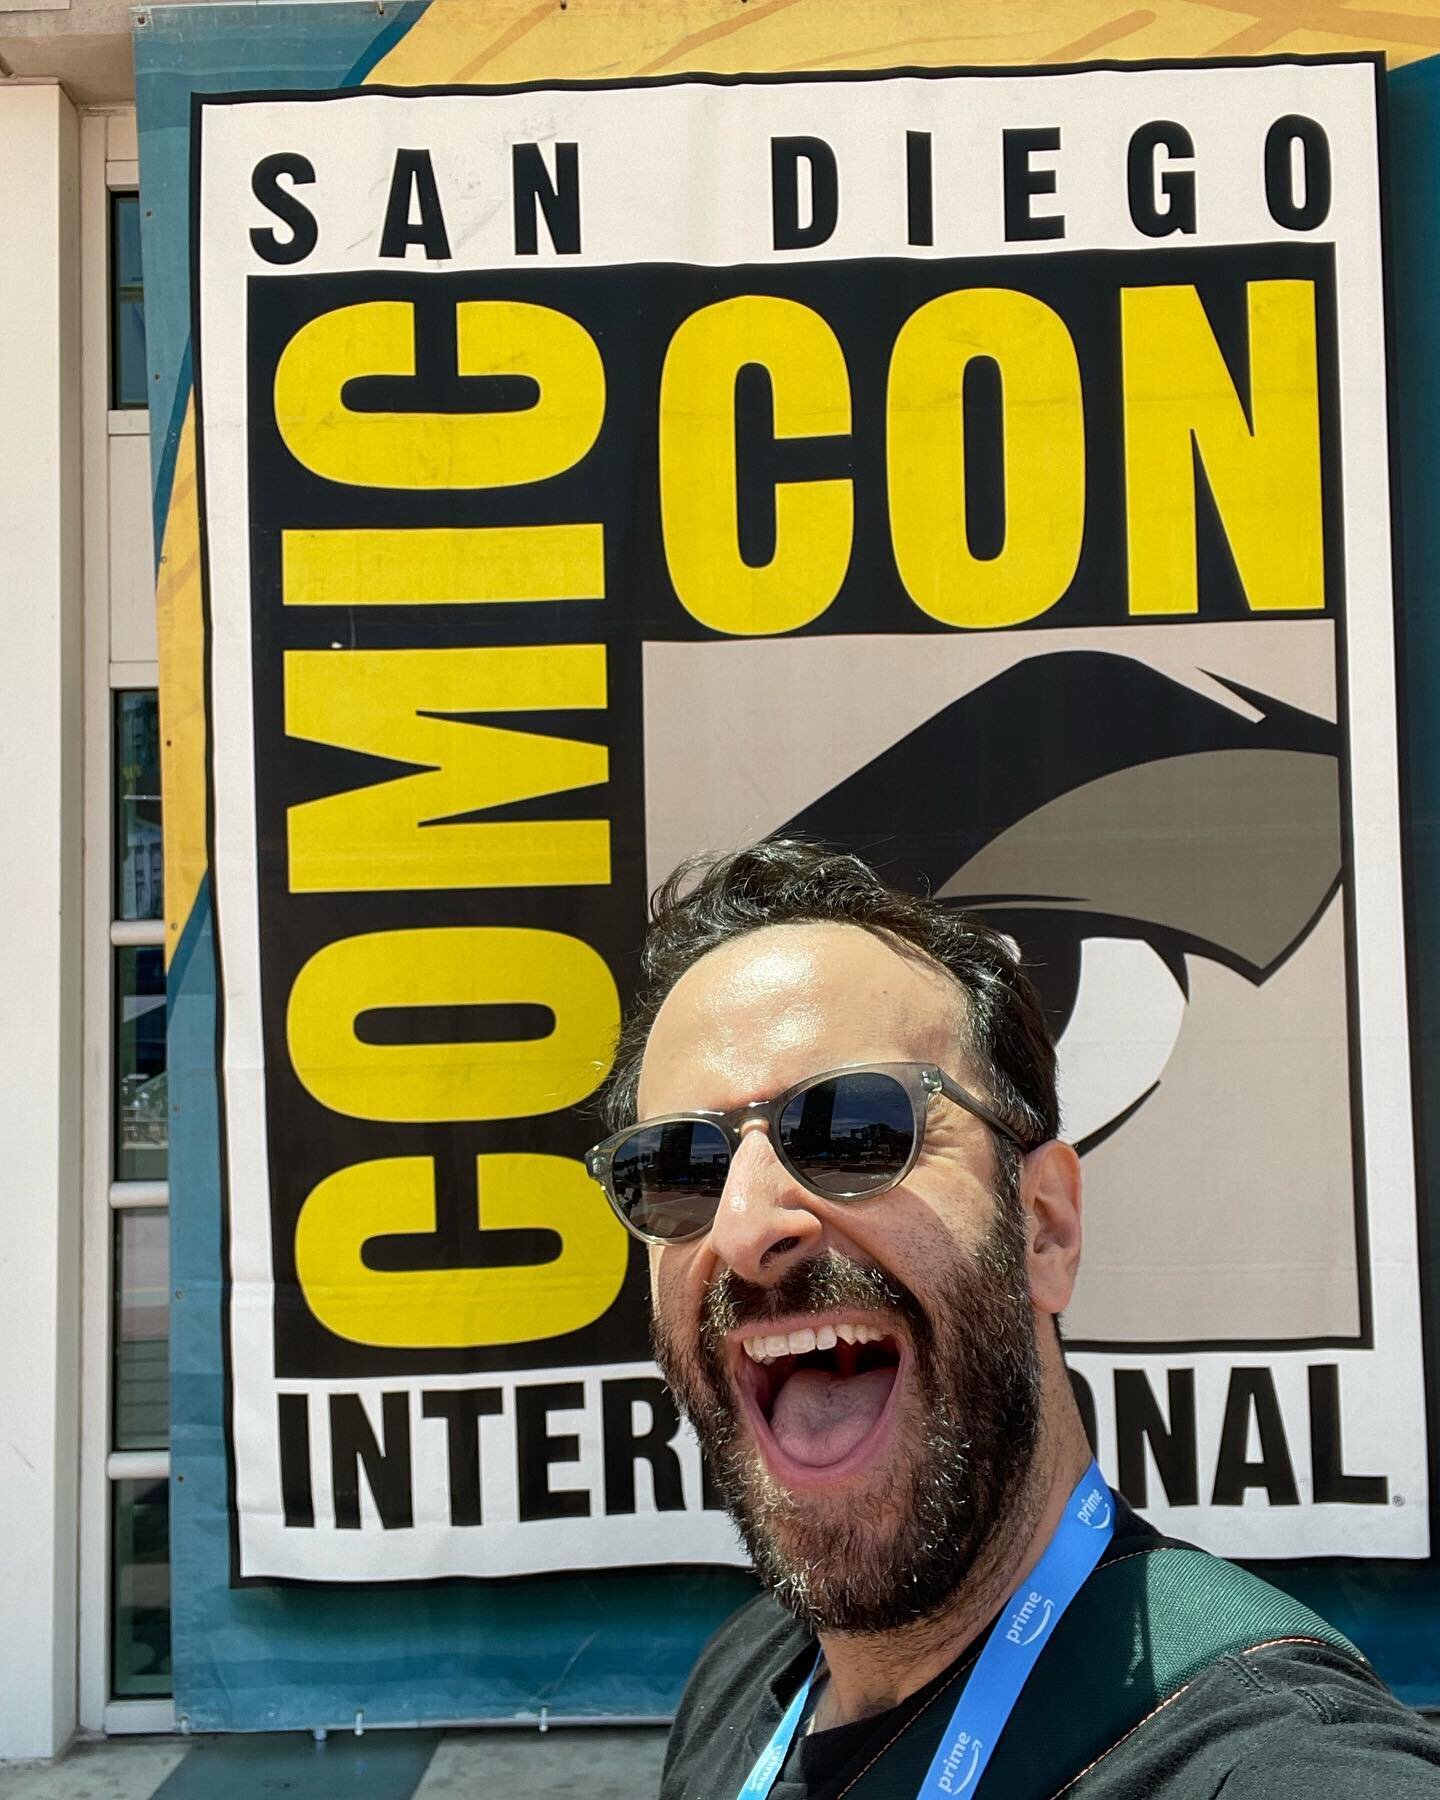 #sdcc photo dump! Thanks to everyone who came to see me. Most fun con in years. See you at the next one!